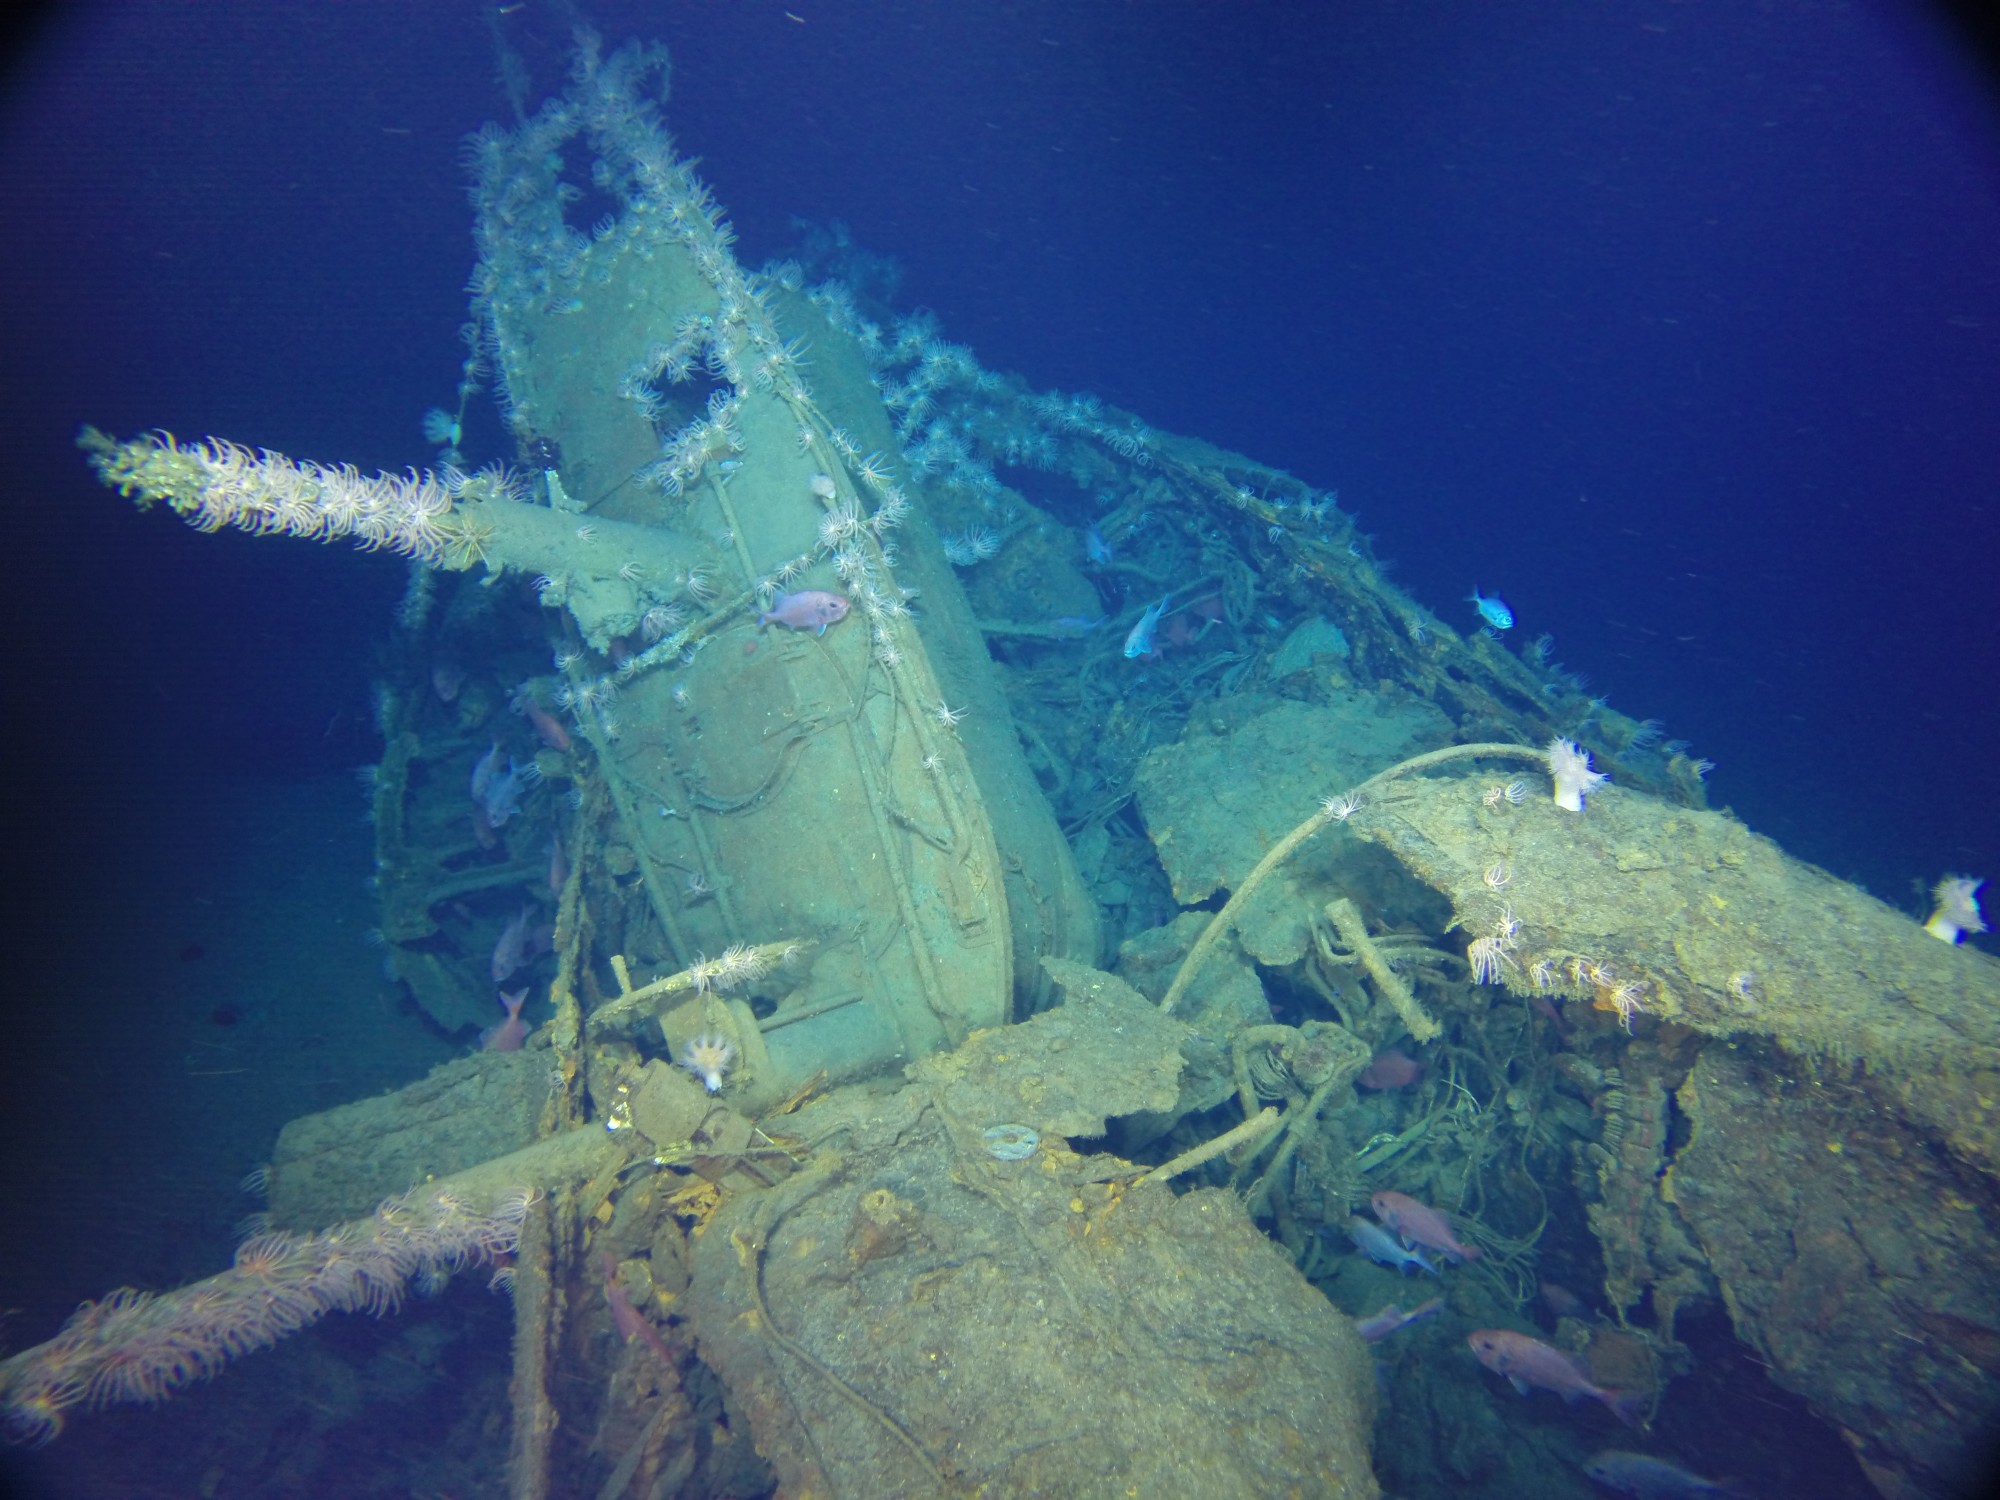 Implosion of AE1’s forward hull has caused the fin to collapse into the remains of the submarine’s Control Room. Image: Paul G. Allen, Find AE1 Ltd., ANMM and Curtin University. Copyright, Navigea Ltd.